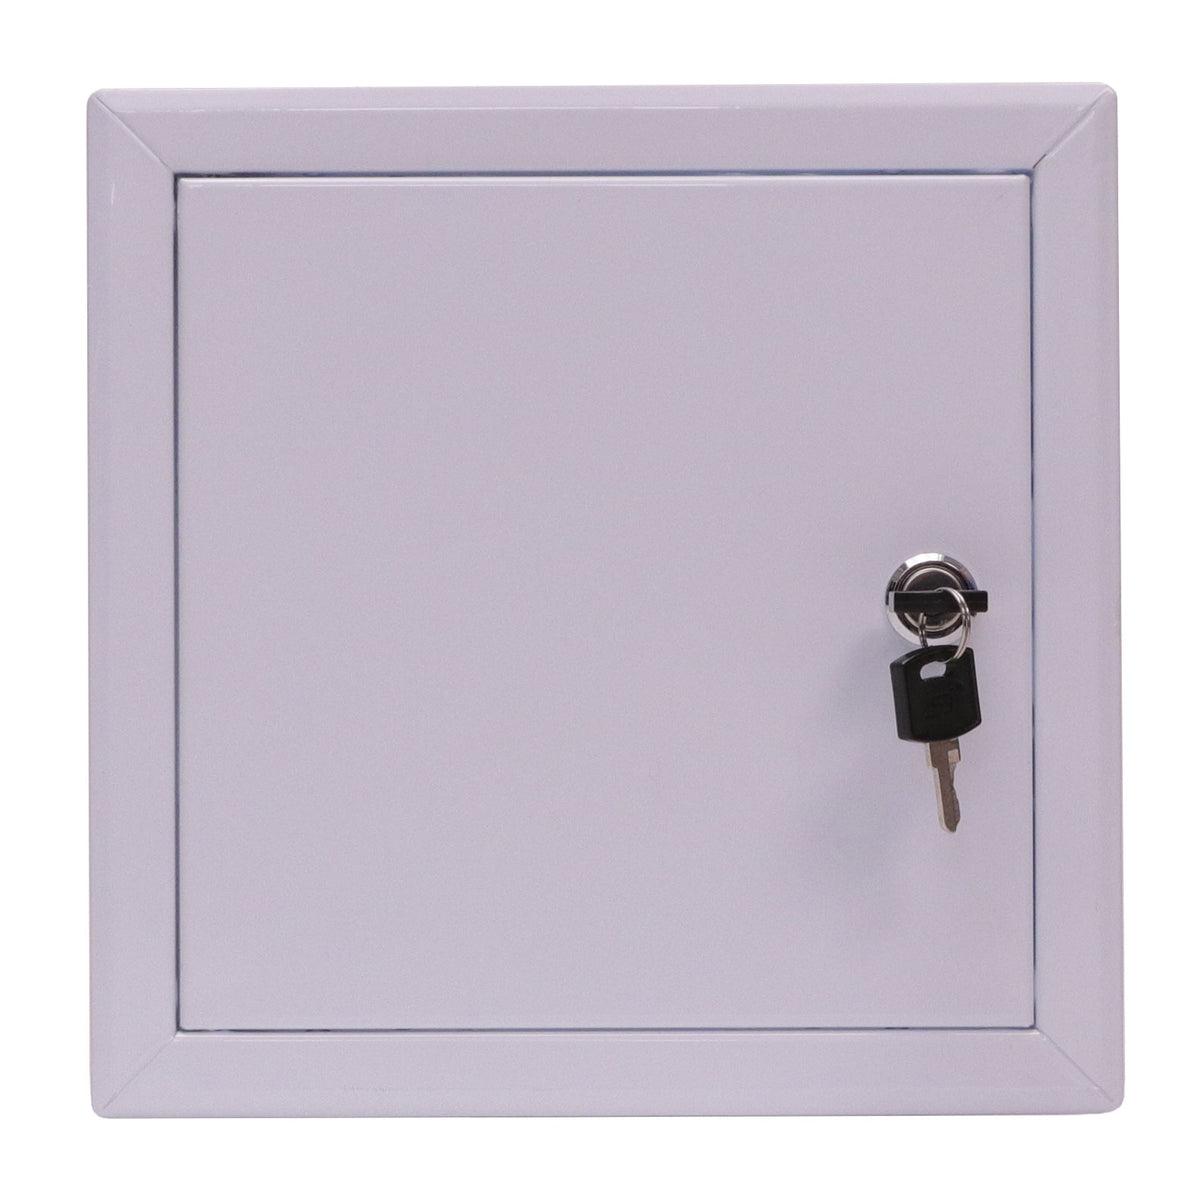 16&quot; X 16&quot; Steel Access Panel Removable Door For Wall / Ceiling Application (Lock and Key) With Frame - [Outer Dimensions: 17&quot; Width X 17&quot; Height]